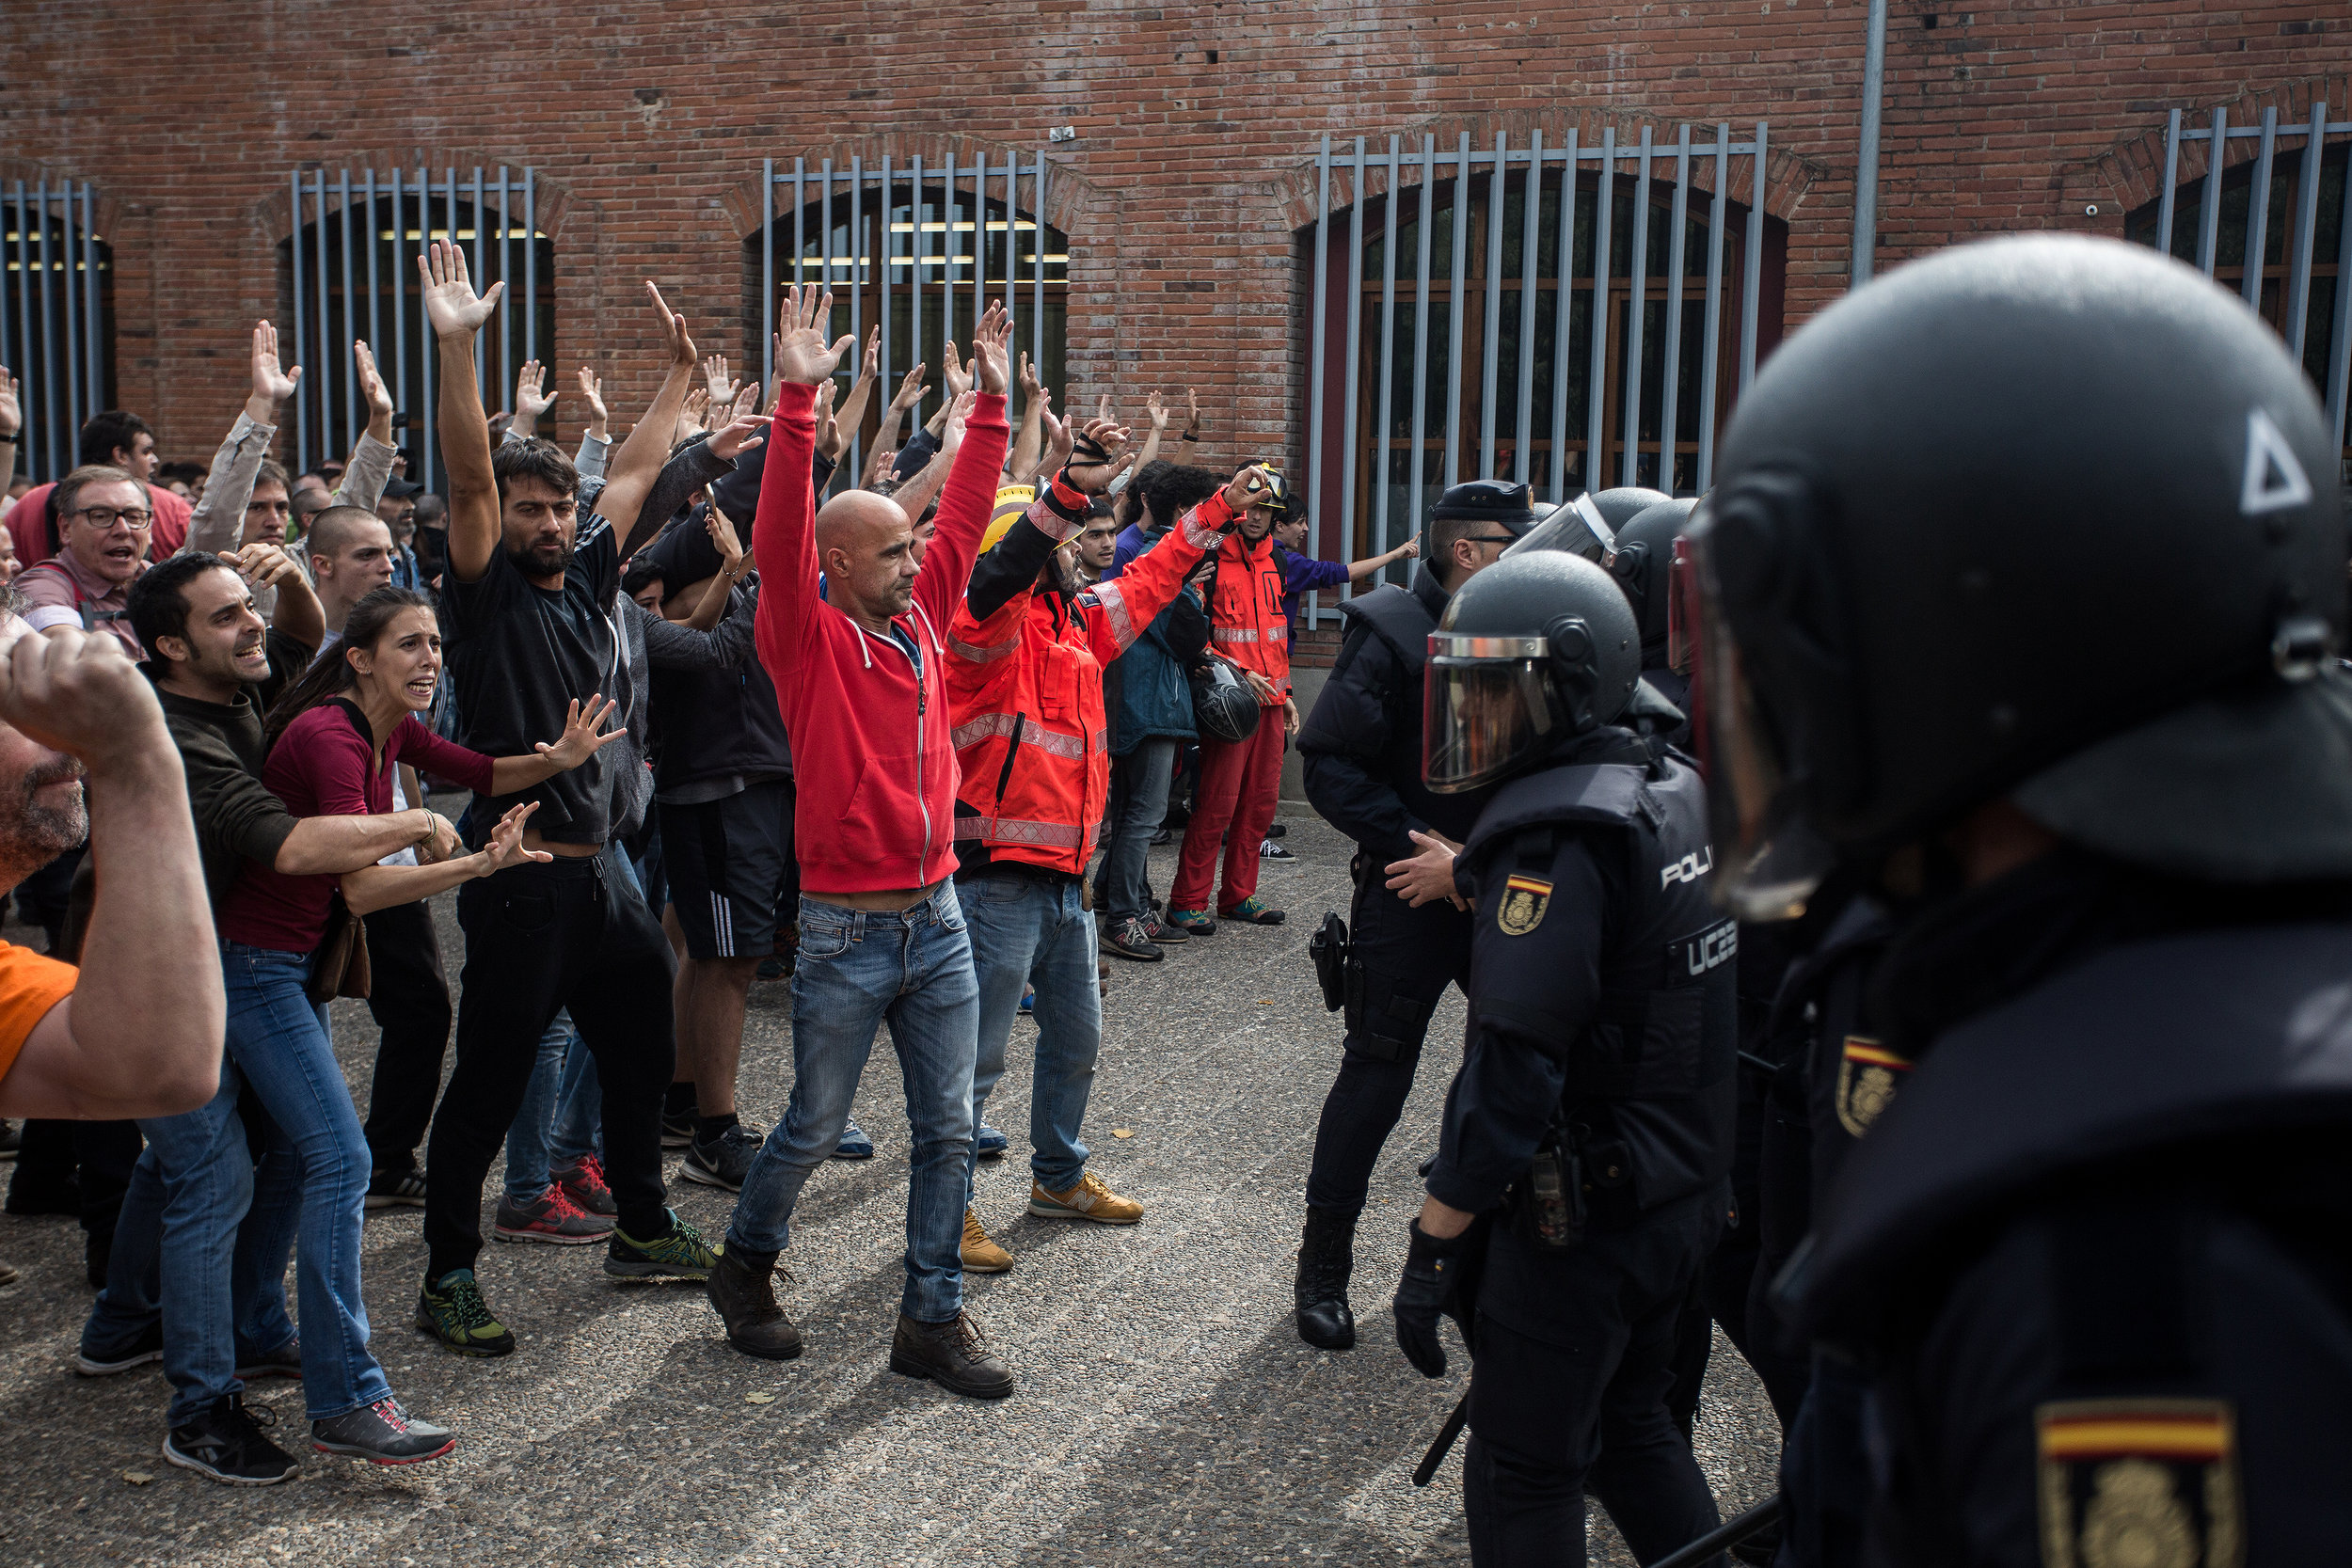 Protesters in front of Spanish police officers on referendum day (by Carles Palacio)